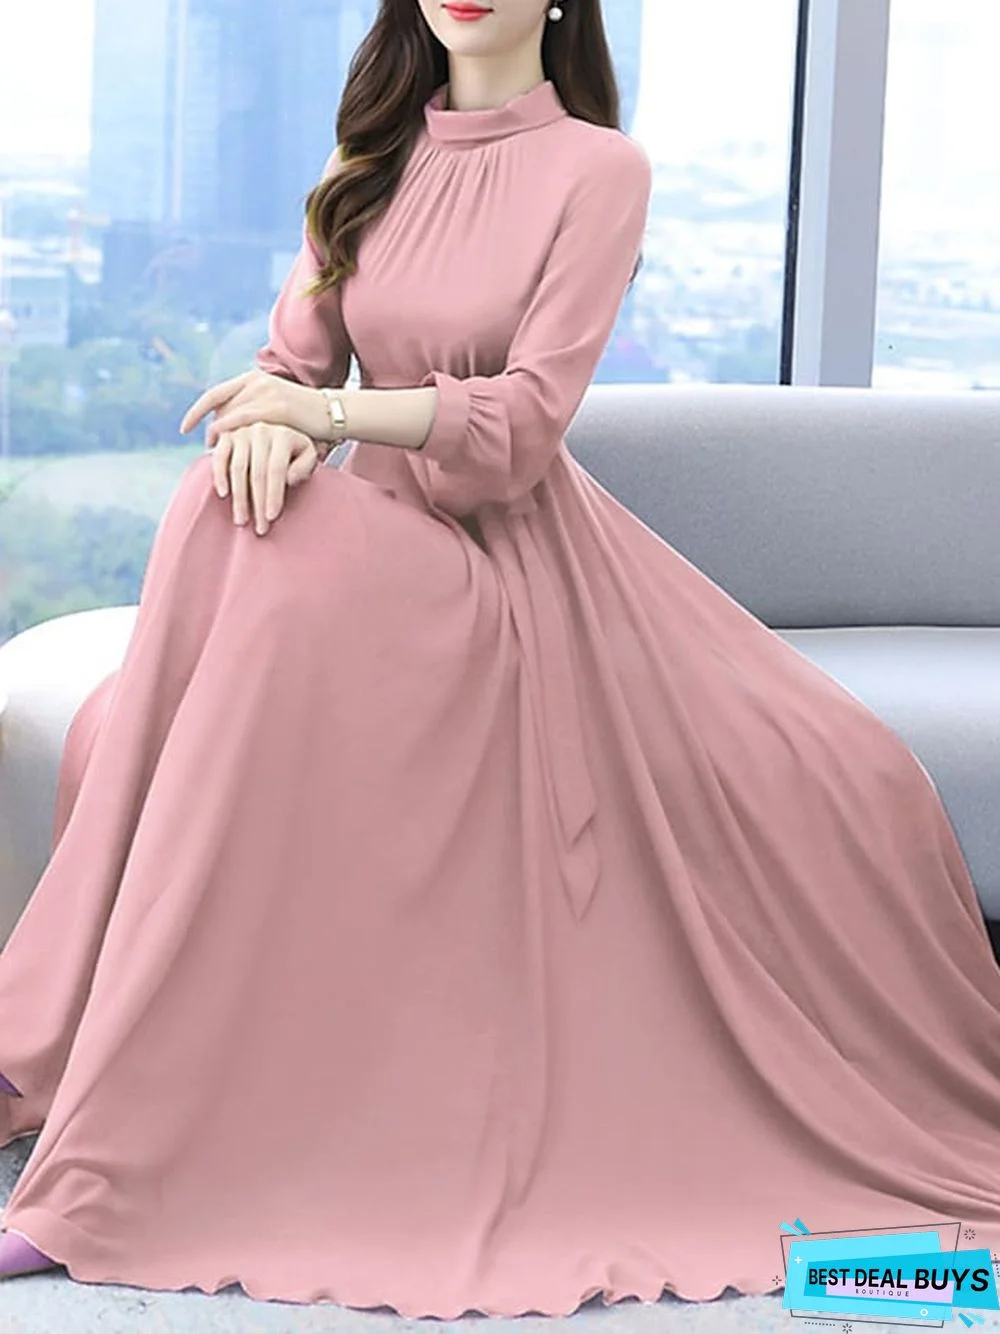 Women‘s Formal Party Dress Swing Dress Long Dress Maxi Dress Green Black Purple Long Sleeve Pure Color Lace up Winter Fall Autumn Stand Collar Winter Dress Fall Dress S M L XL XXL 3XL 4XL